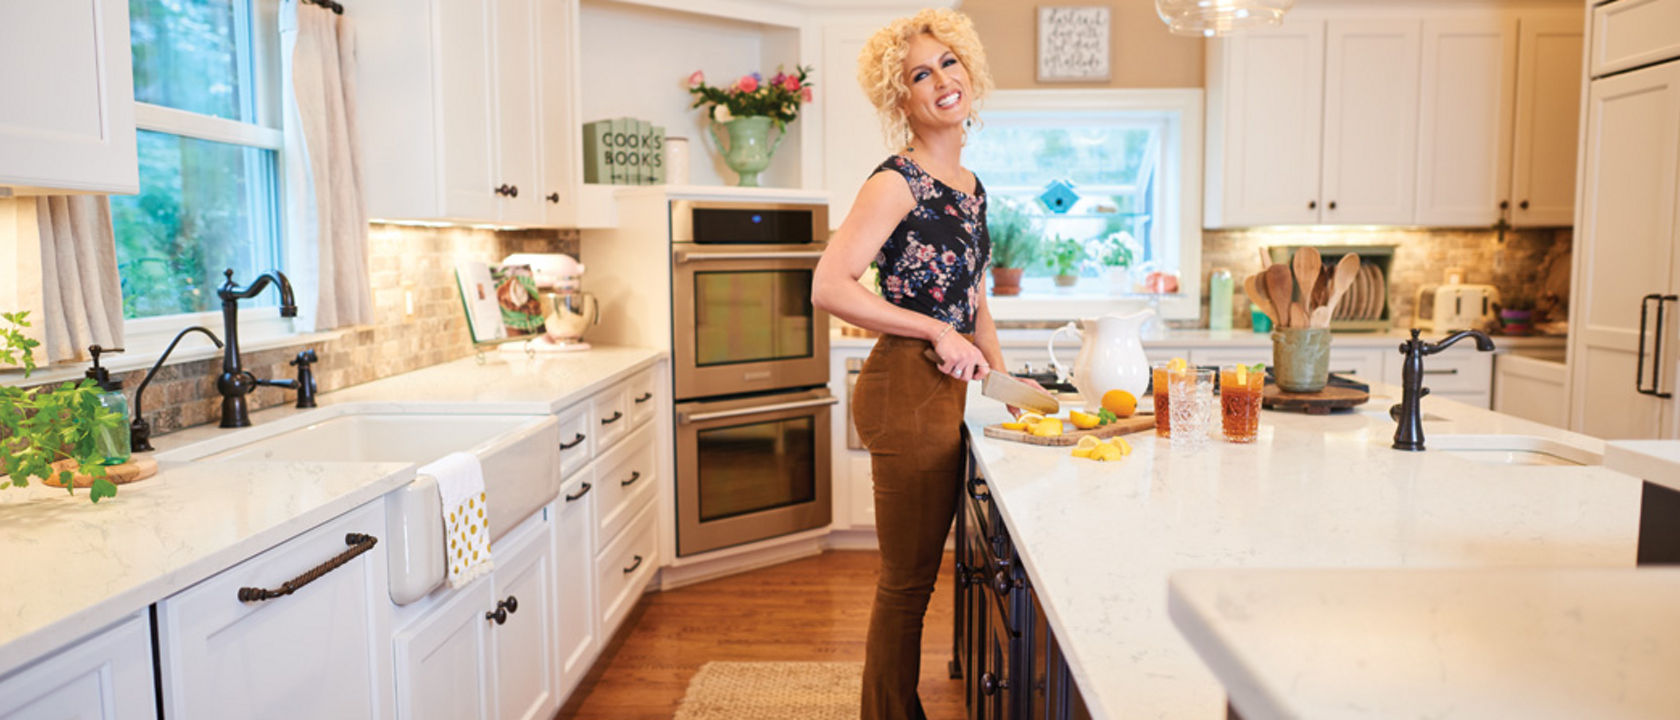 Photograph of Kimberly Schlapman cutting fruit on a cutting board on a kitchen island.